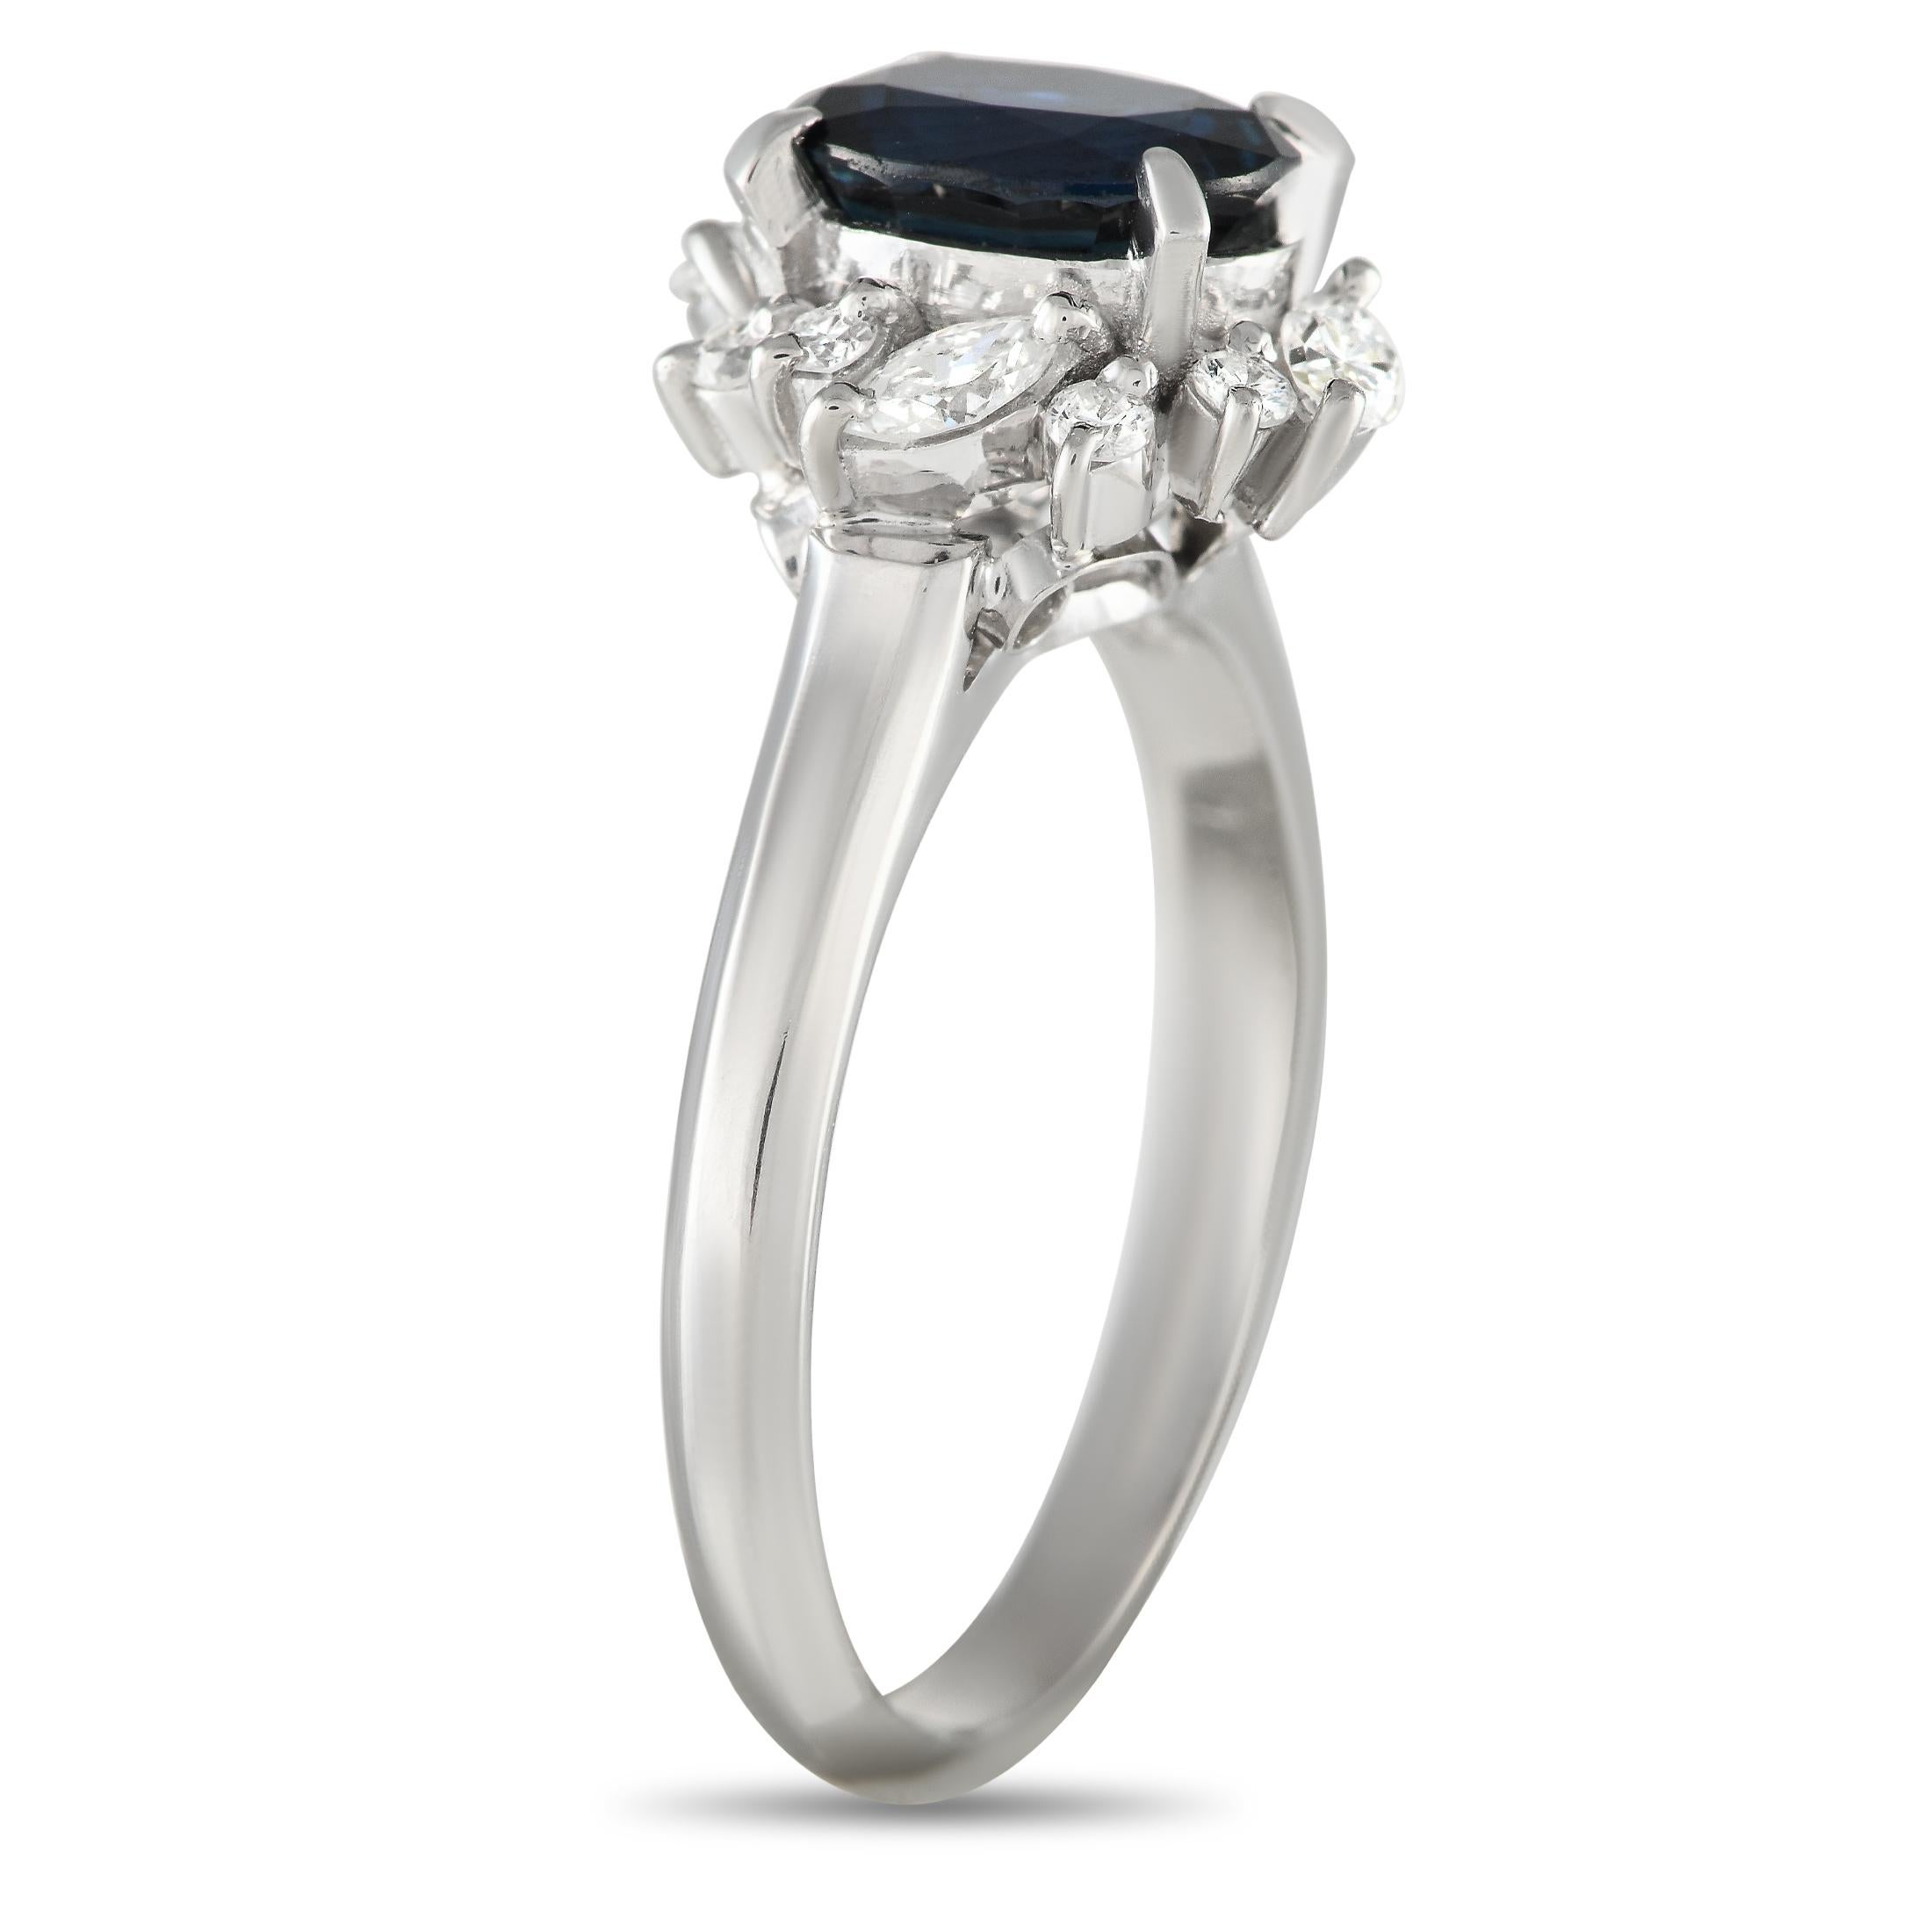 Sure to steal her heart is this elegant diamond and sapphire ring with just the perfect hint of edginess. It features a 2mm-thin platinum band holding a majestic 1.52-carat sapphire center stone. The glittering halo, composed of round and marquise